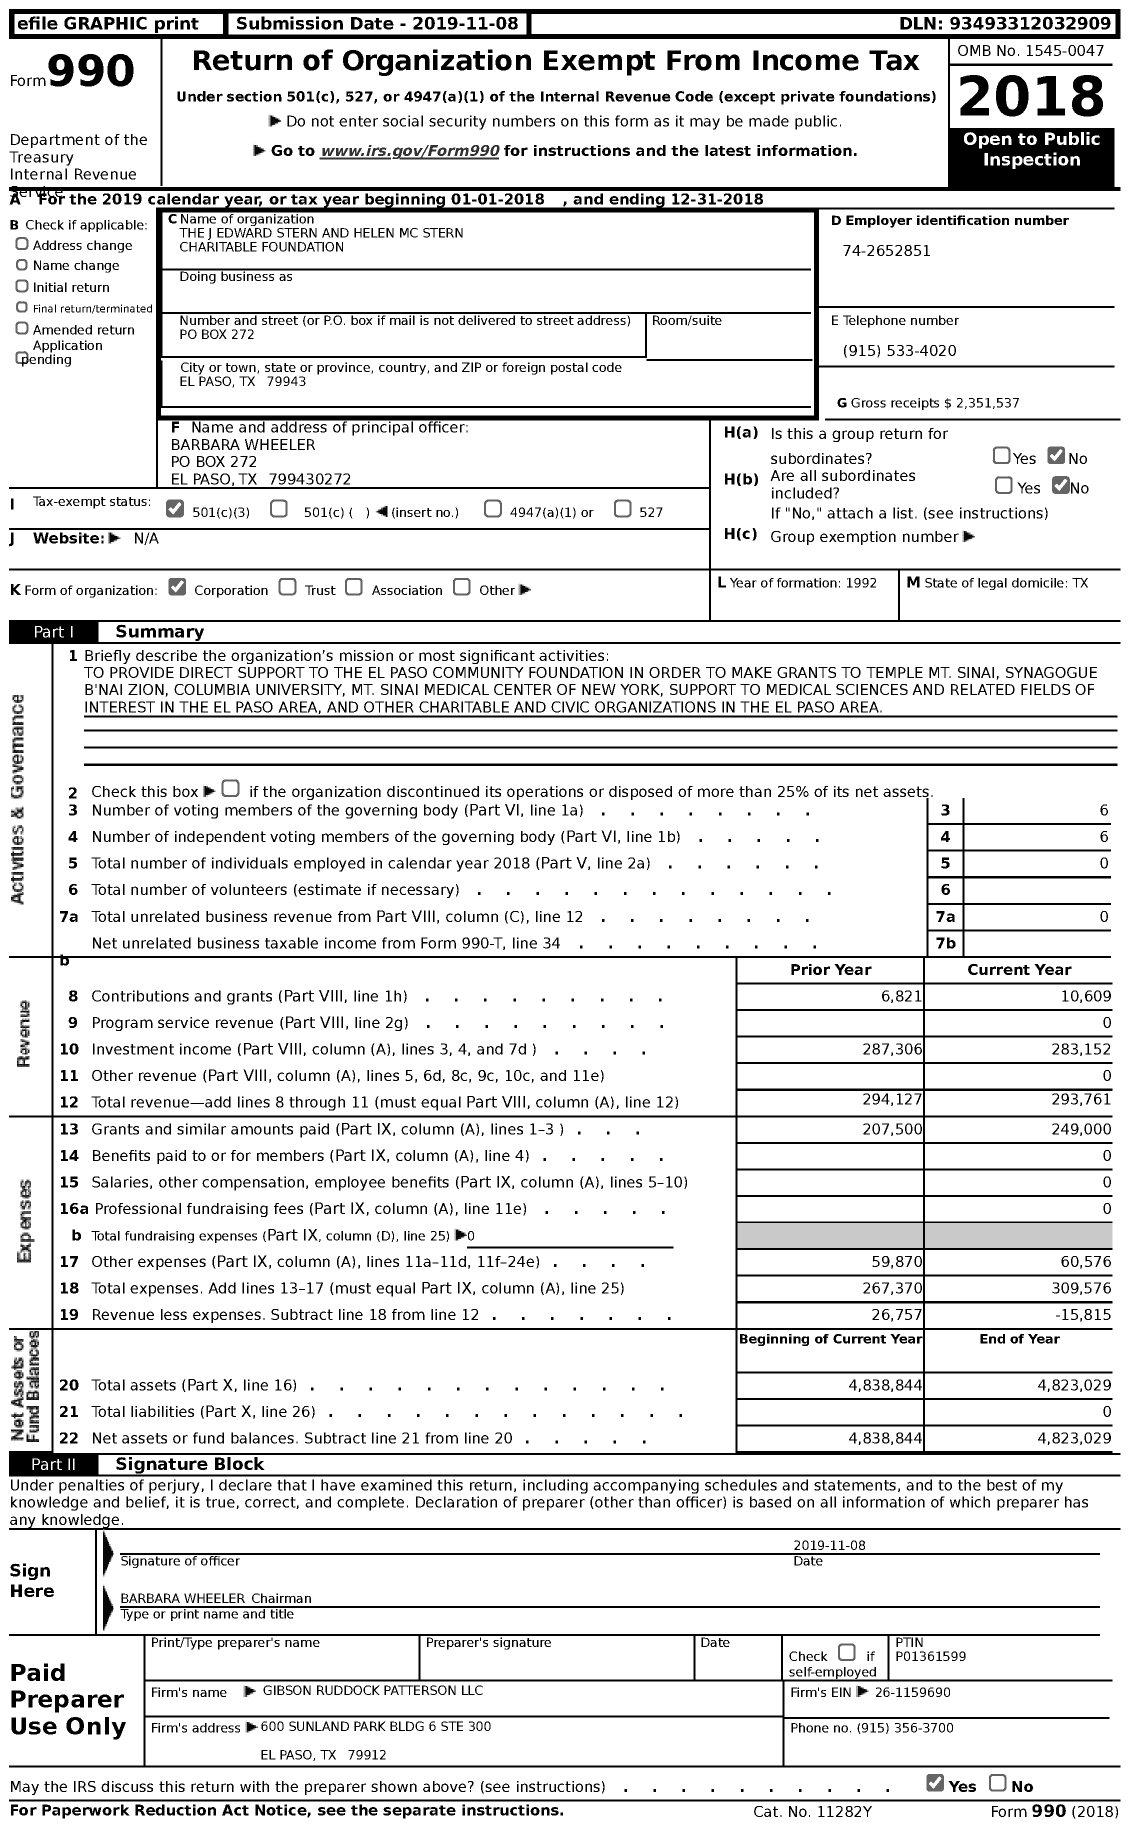 Image of first page of 2018 Form 990 for The J Edward Stern and Helen MC Stern Charitable Foundation